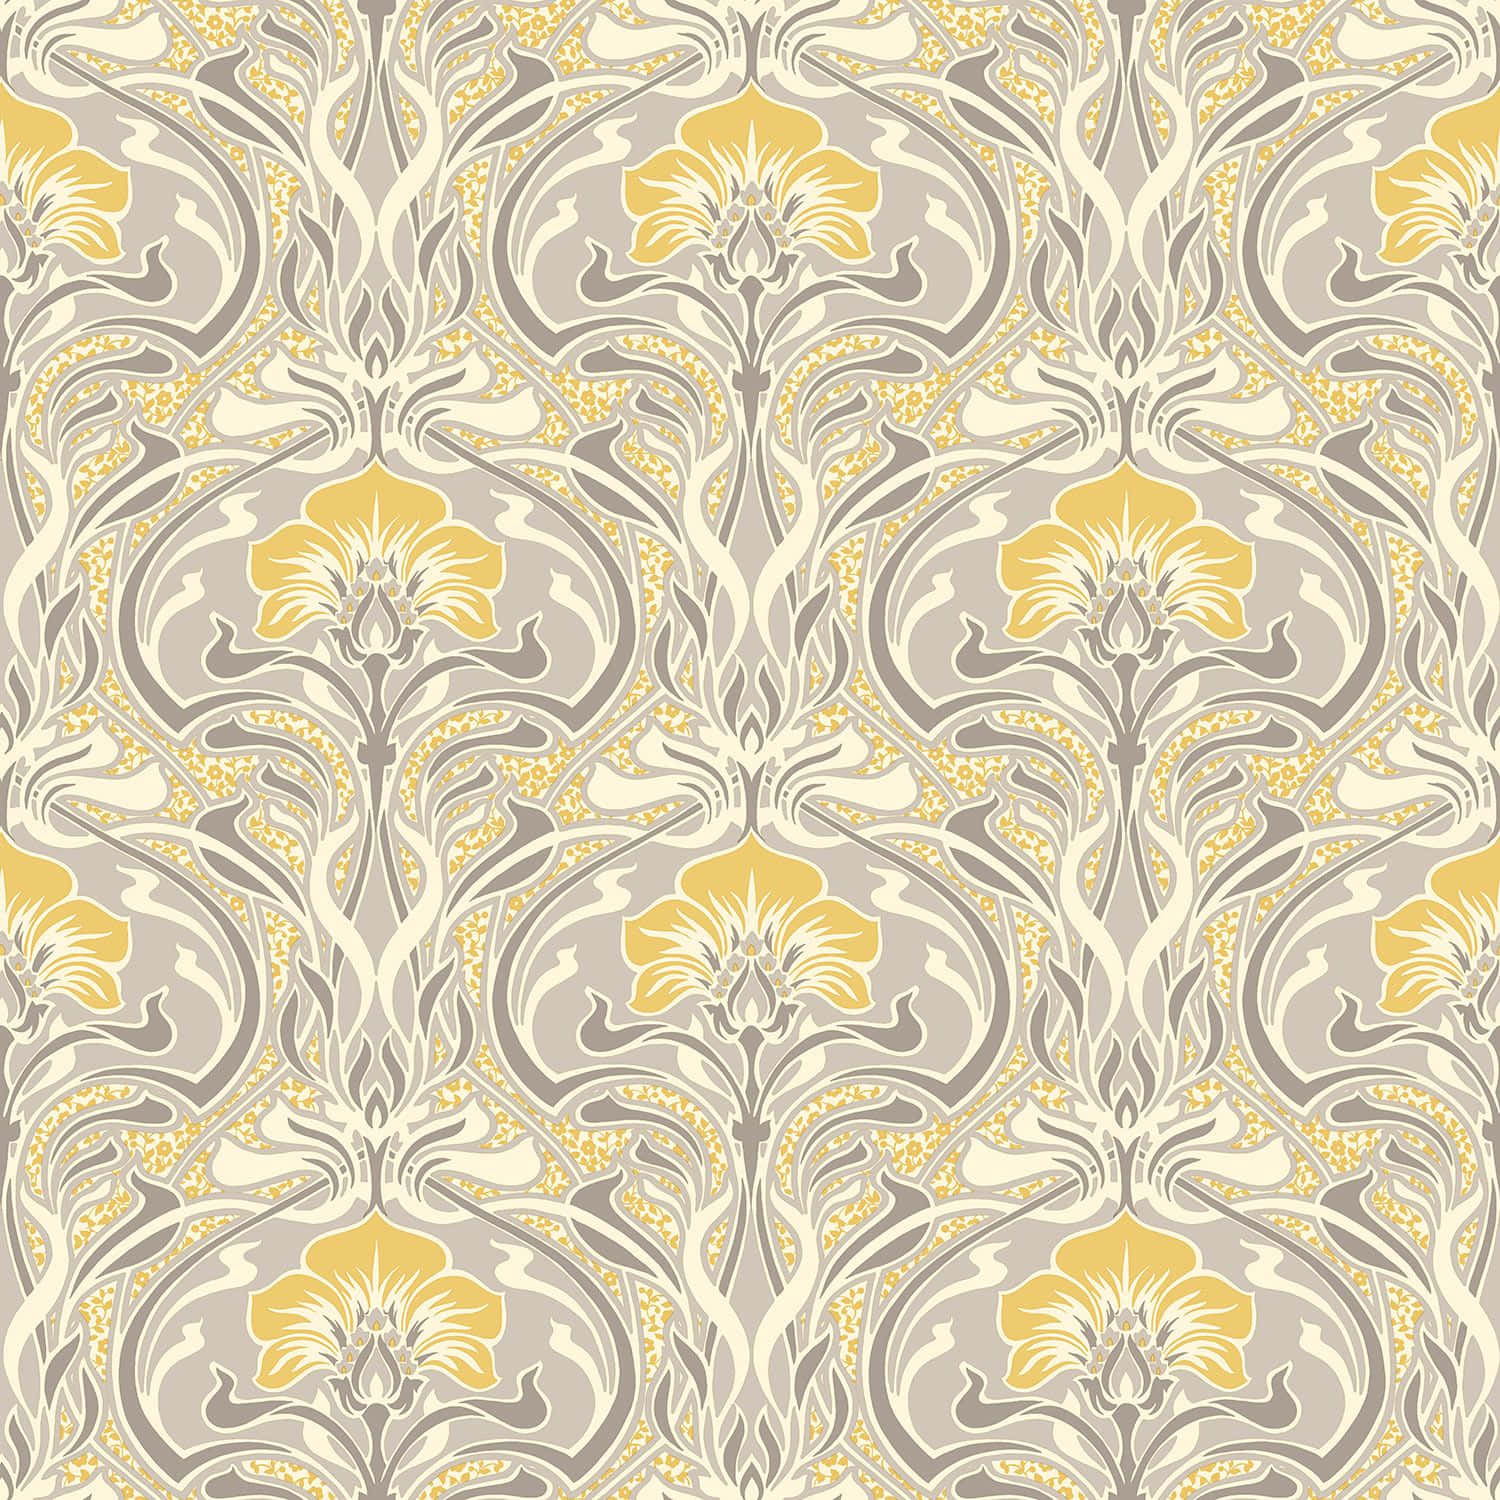 A Wallpaper With Yellow And Gray Flowers Wallpaper